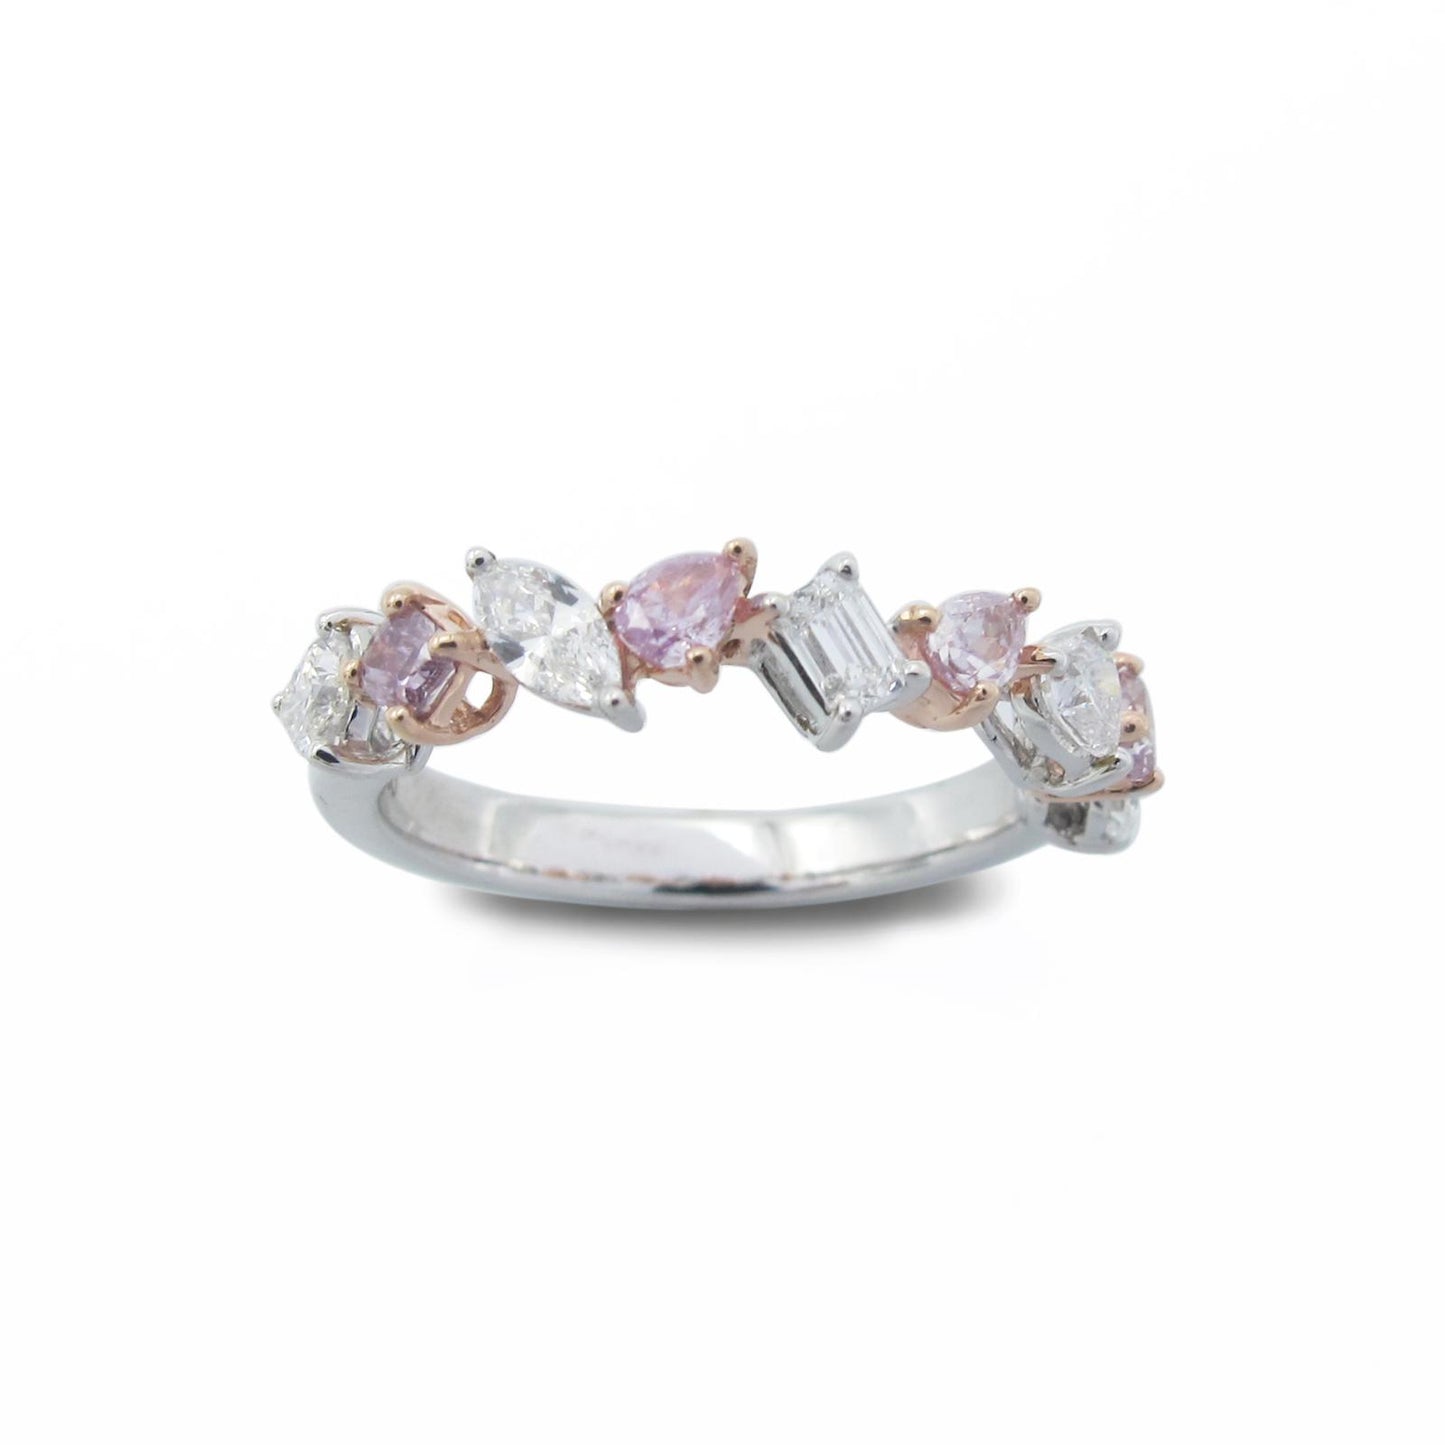 Affordable pink diamonds. Pink diamond ring. Pink diamond pear shape. Pink diamond jewelry. Pink diamond eternity rings